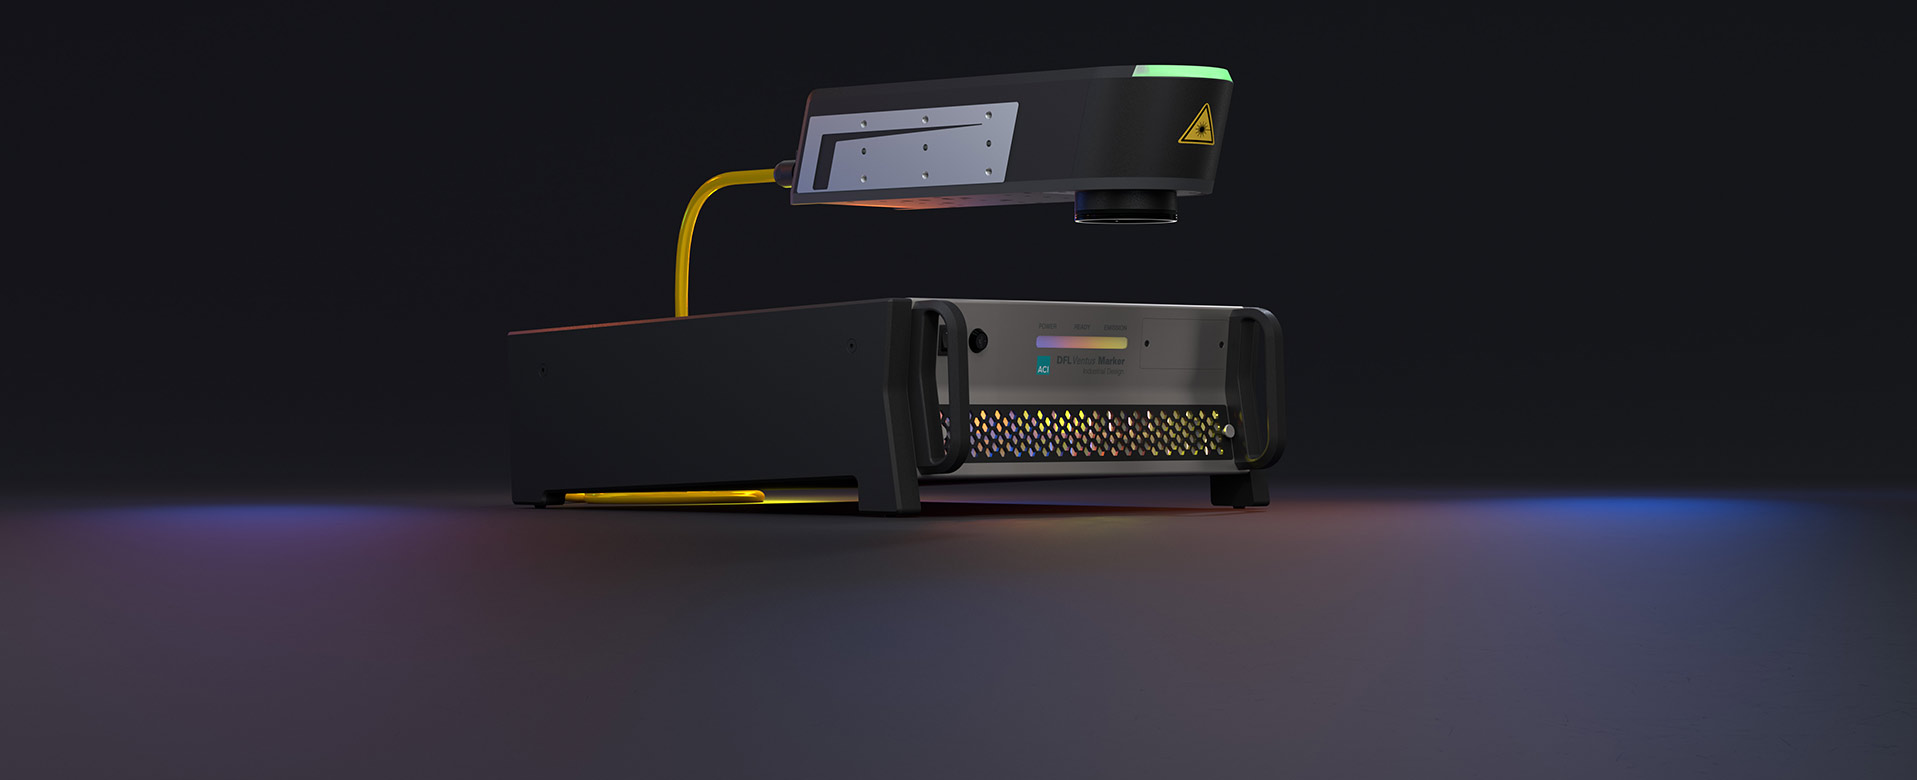 Fiber laser system for industrial environments DFL Ventus Marker Industrial Design with laser head and 19-inch slide-in unit on a dark background